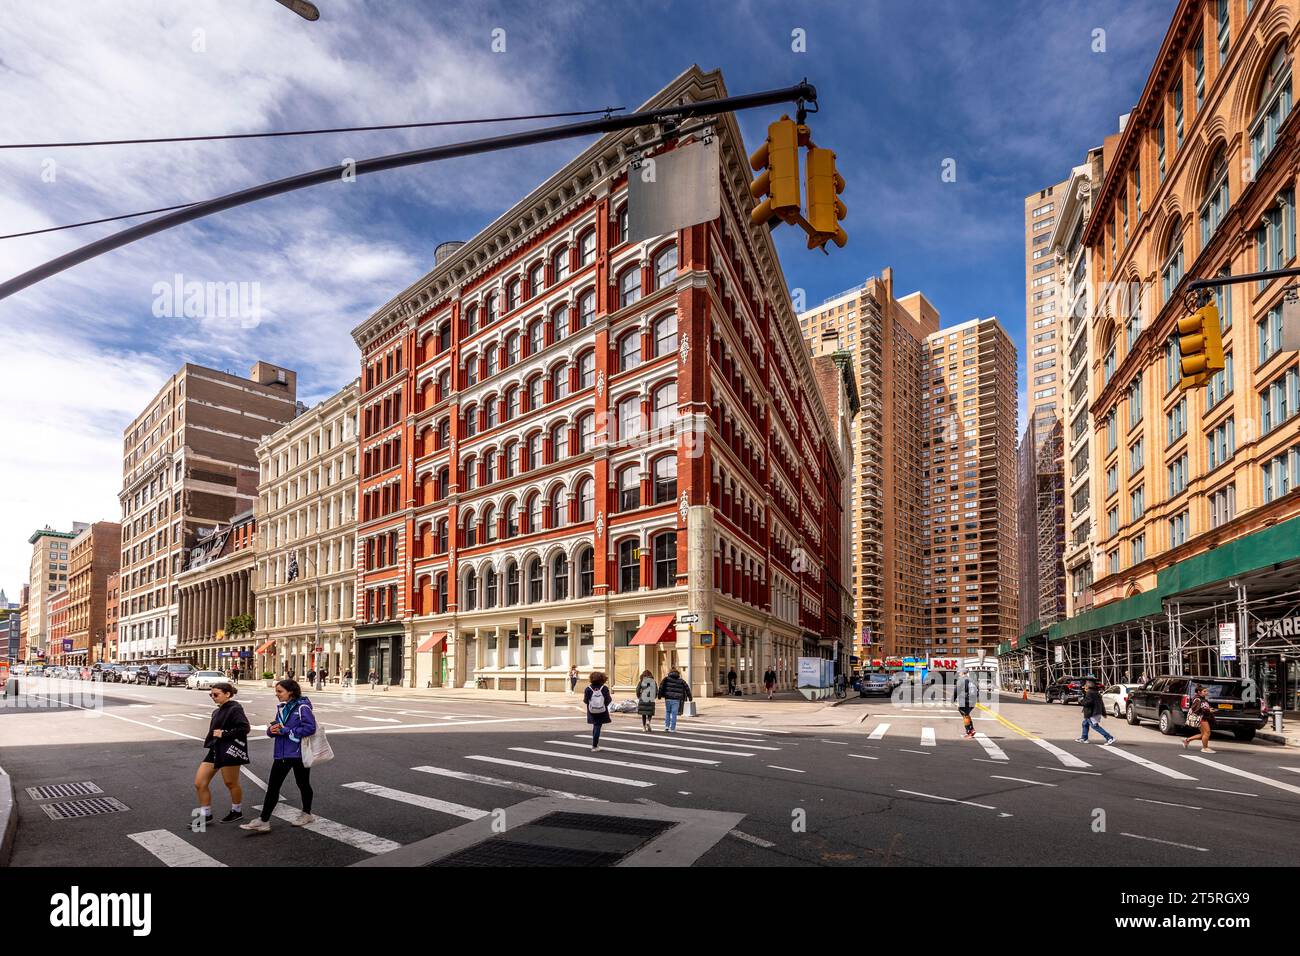 New York, USA - April 23, 2023: The Astor Place Building at 444 Lafayette Street was built in 1876 and is a cast iron building designed by Griffith Th Stock Photo